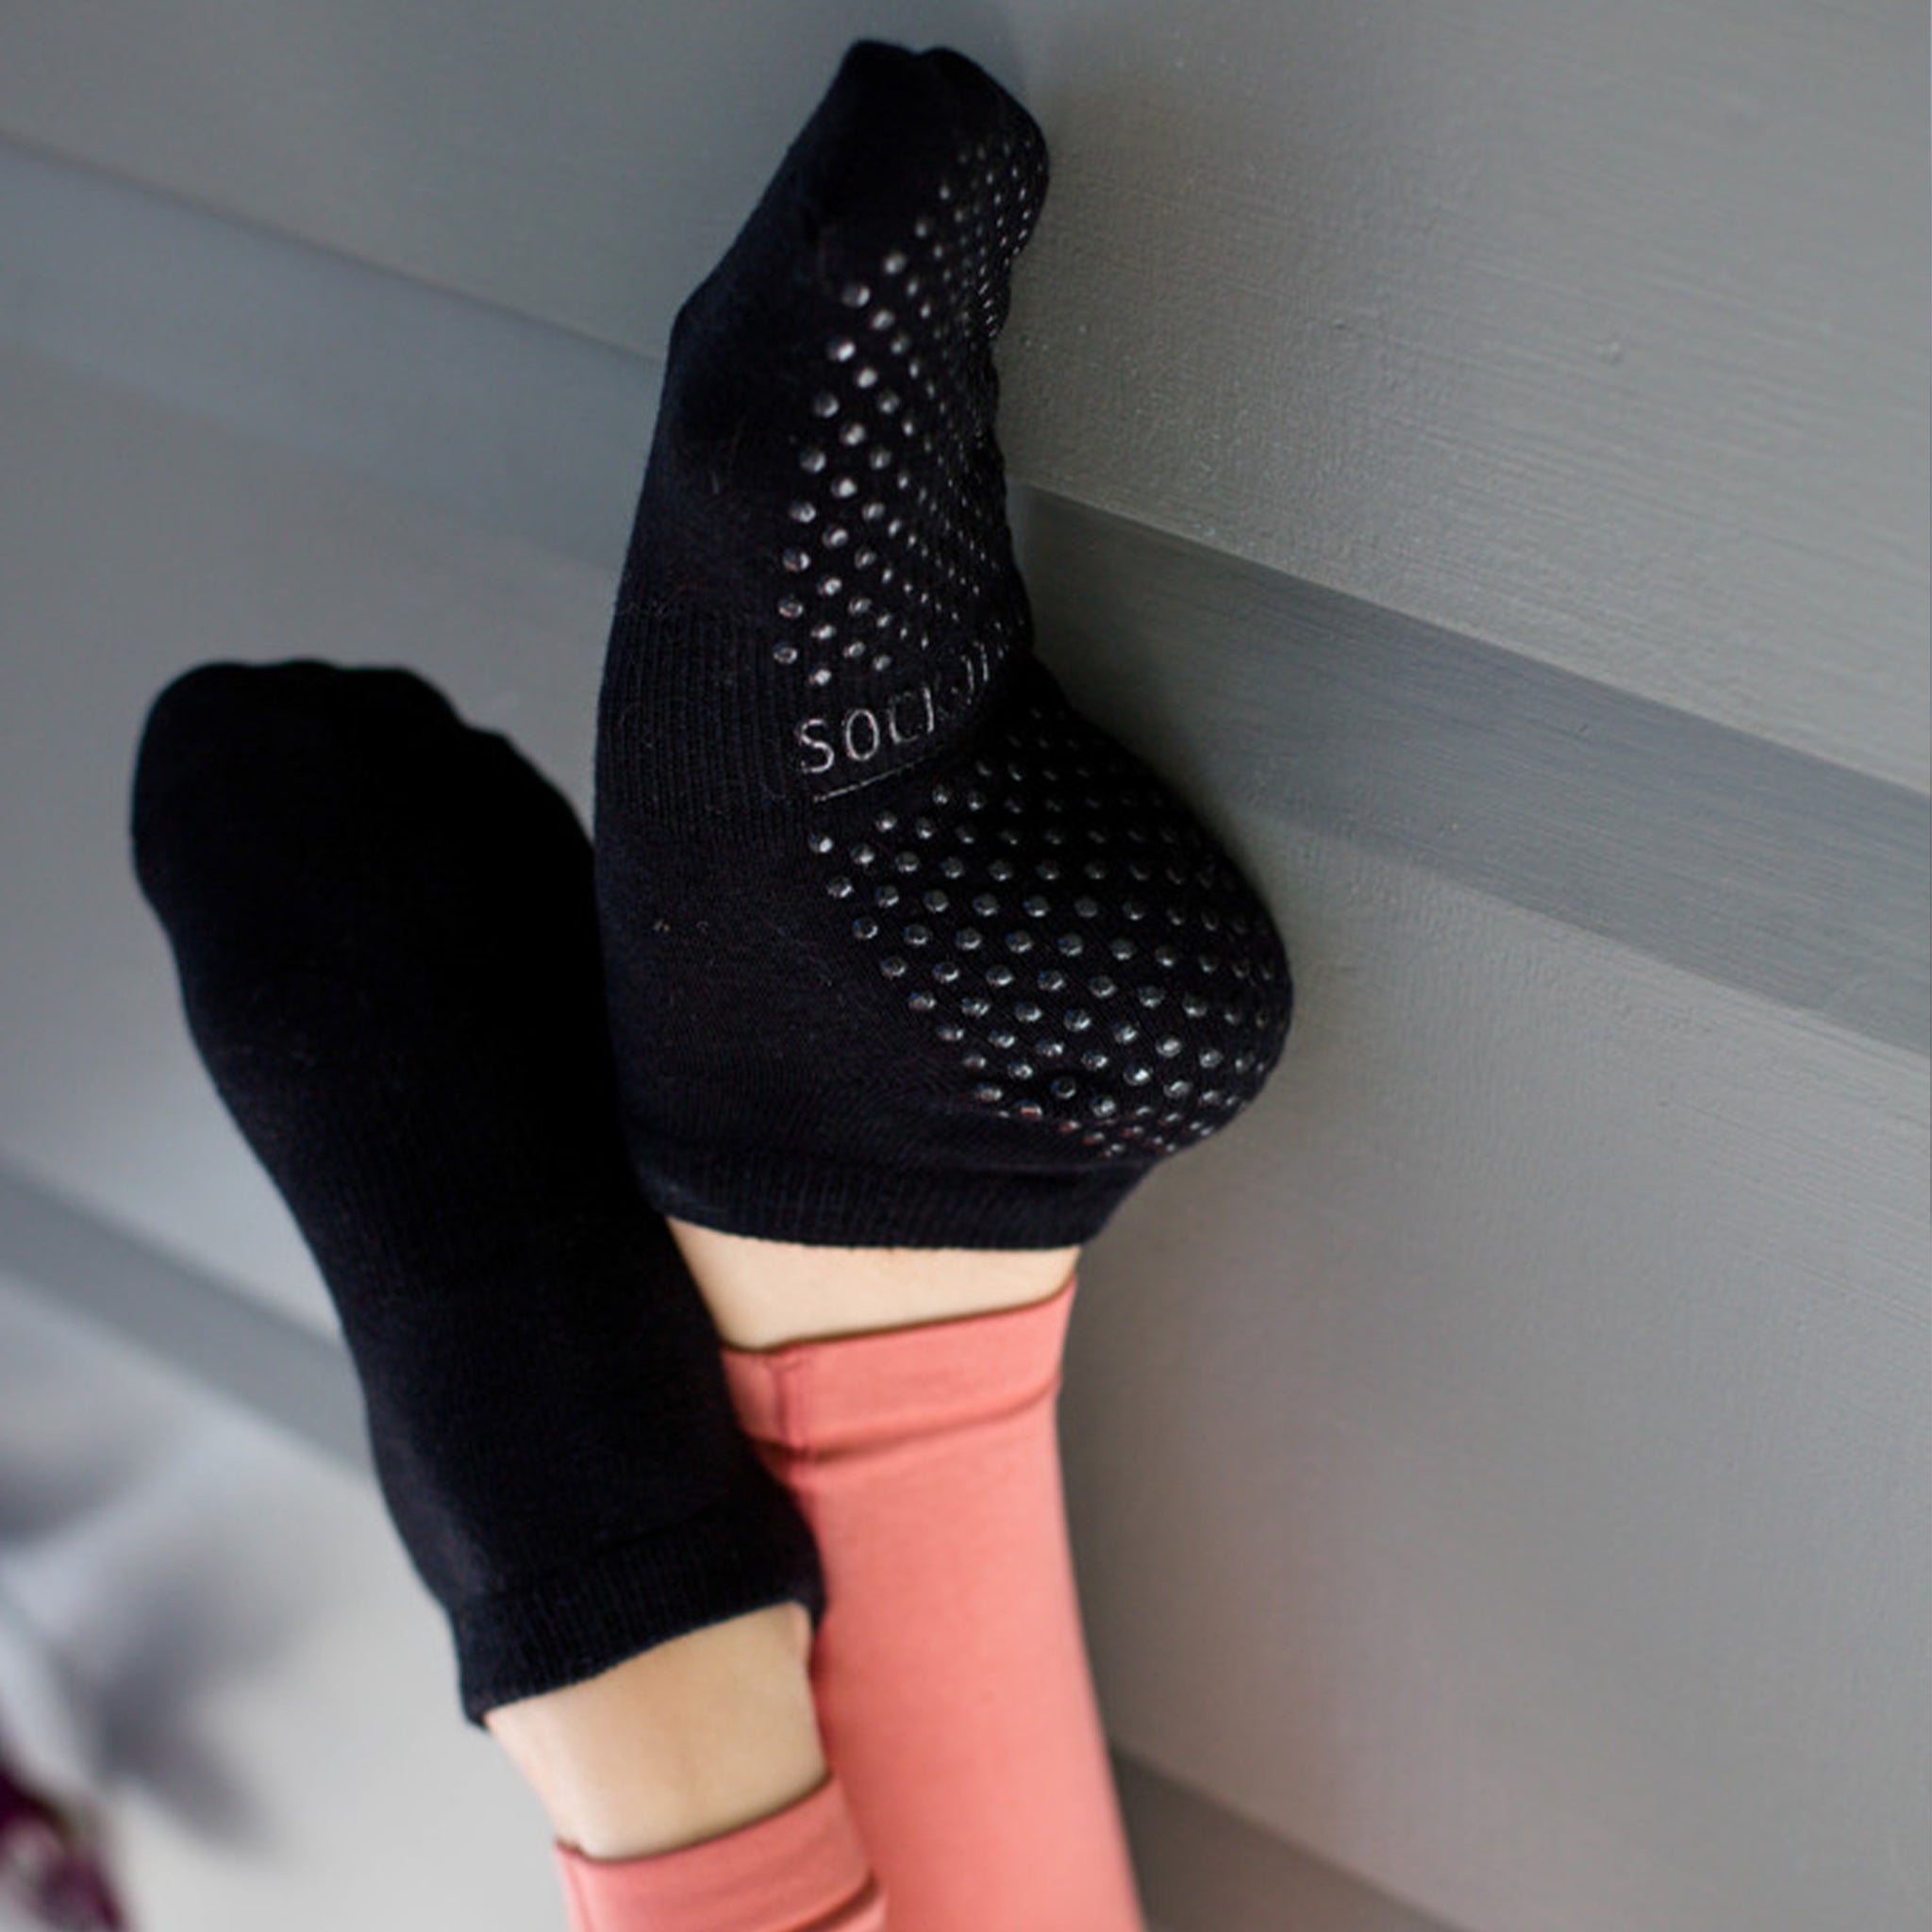 Classic Black Grip Socks for Pilates and Yoga - SOCK IT AND CO.®